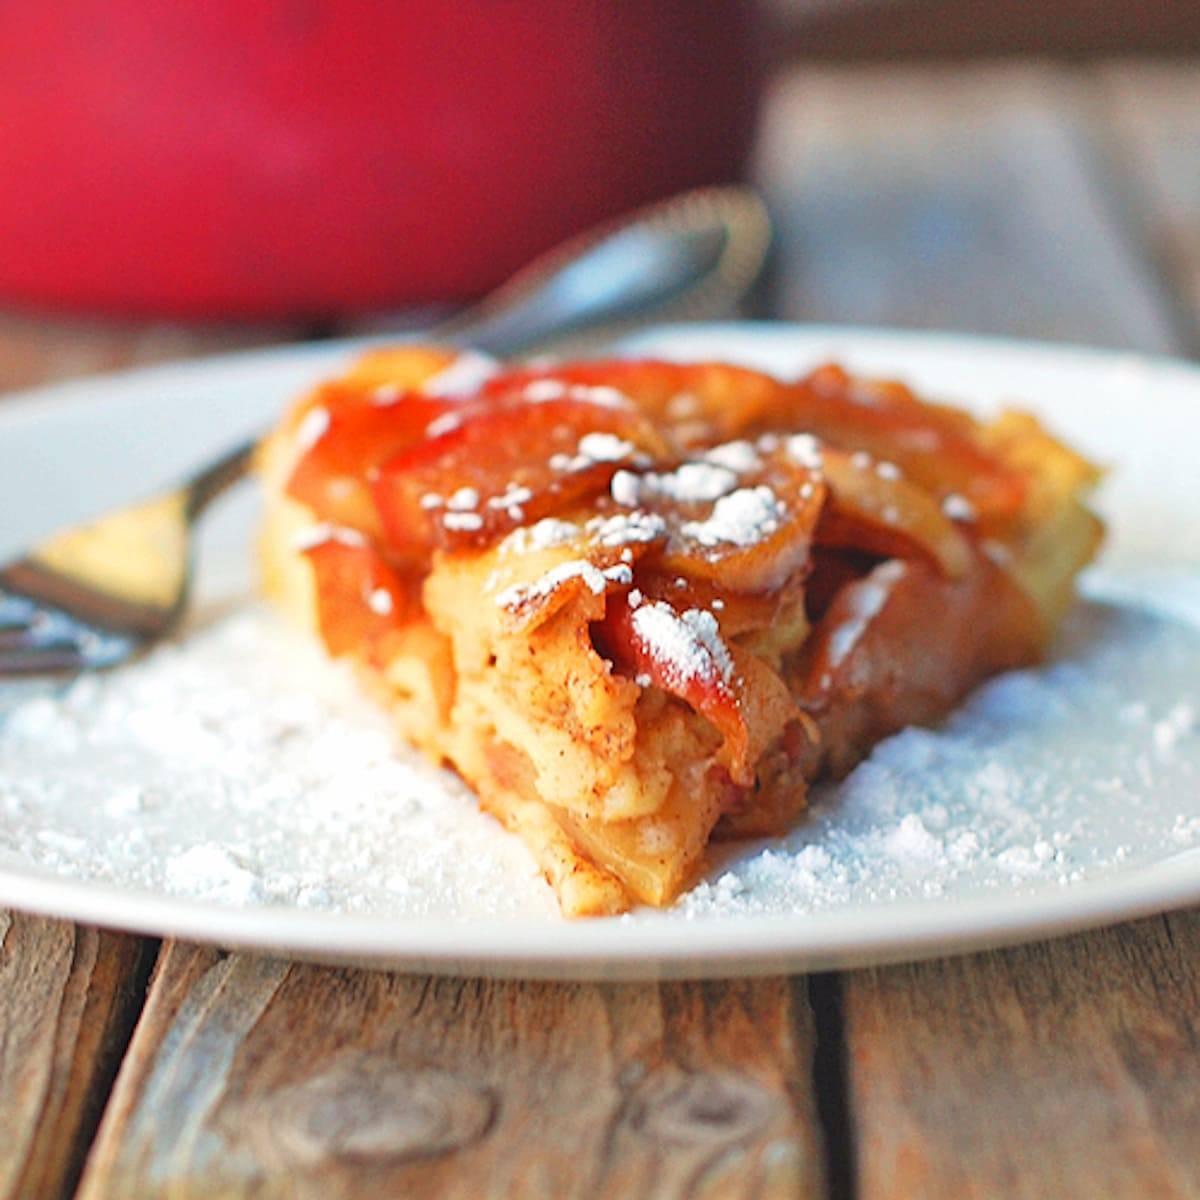 Baked apple pancake is baked in a cast iron skillet and topped with a homemade apple cider syrup on a plate.